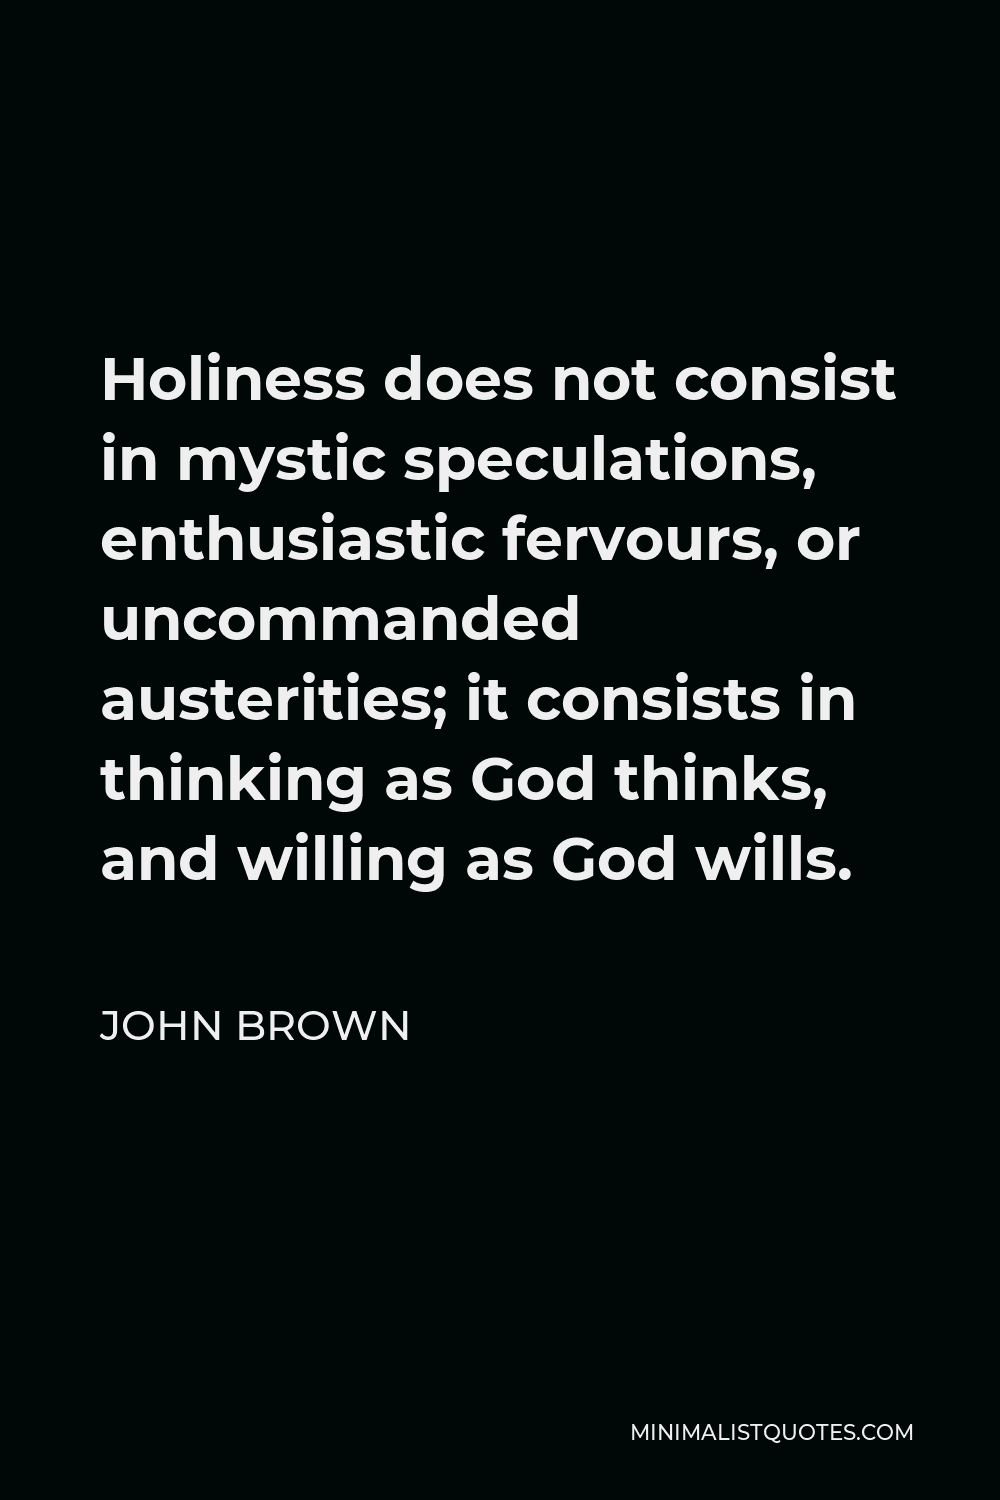 John Brown Quote - Holiness does not consist in mystic speculations, enthusiastic fervours, or uncommanded austerities; it consists in thinking as God thinks, and willing as God wills.